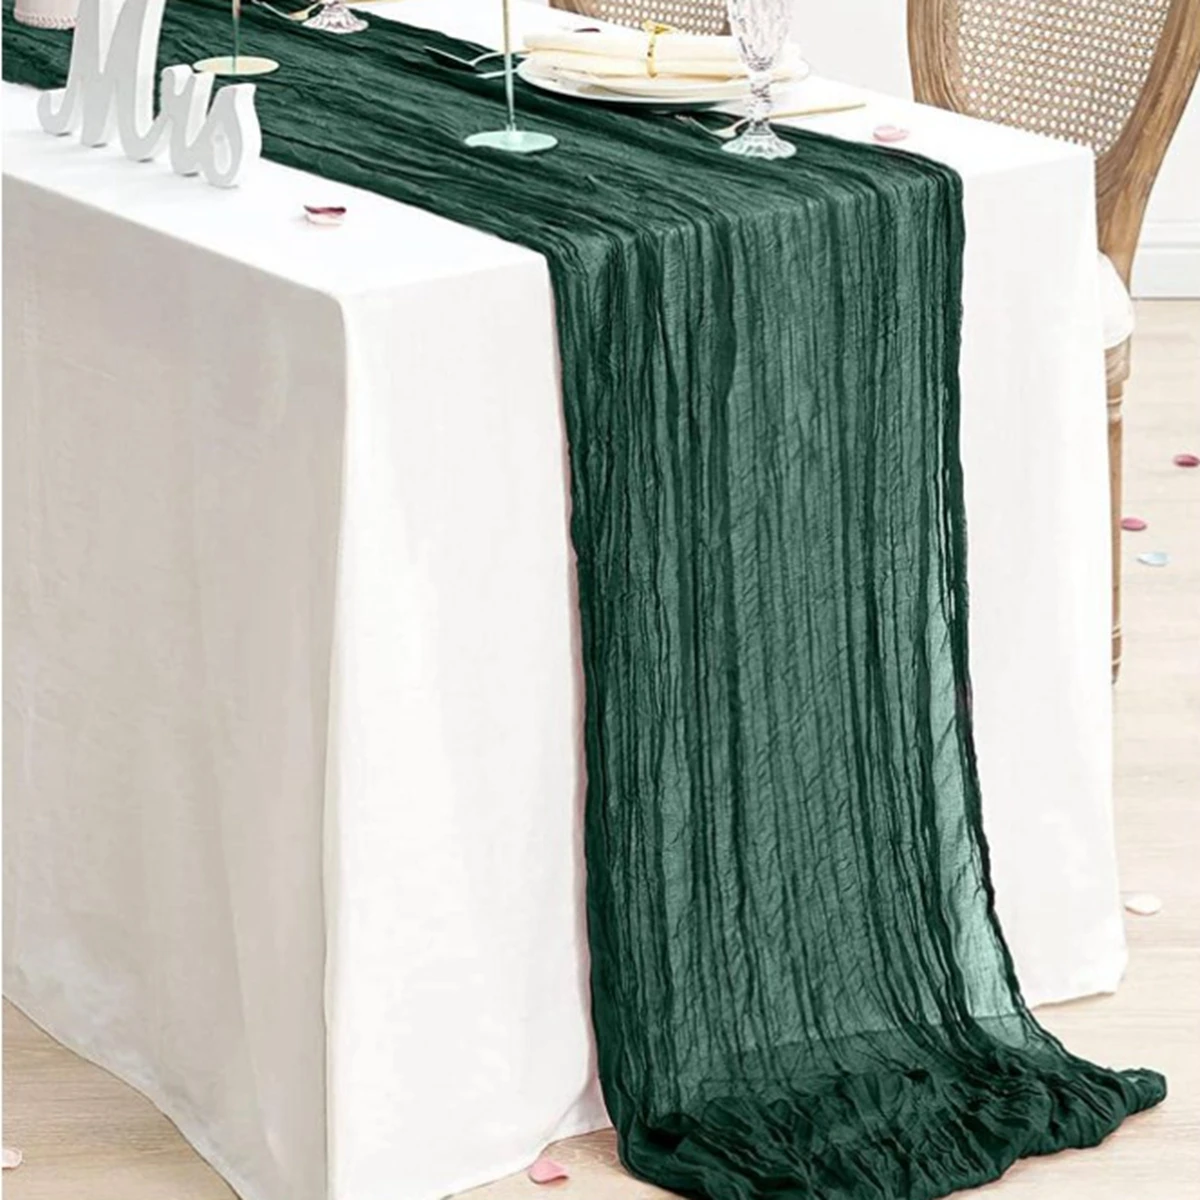 

Green Gauze Table Runner Burlap Cheesecloth Table Setting Dining Rustic Country Wedding Birthday Decor Boho Table Linens